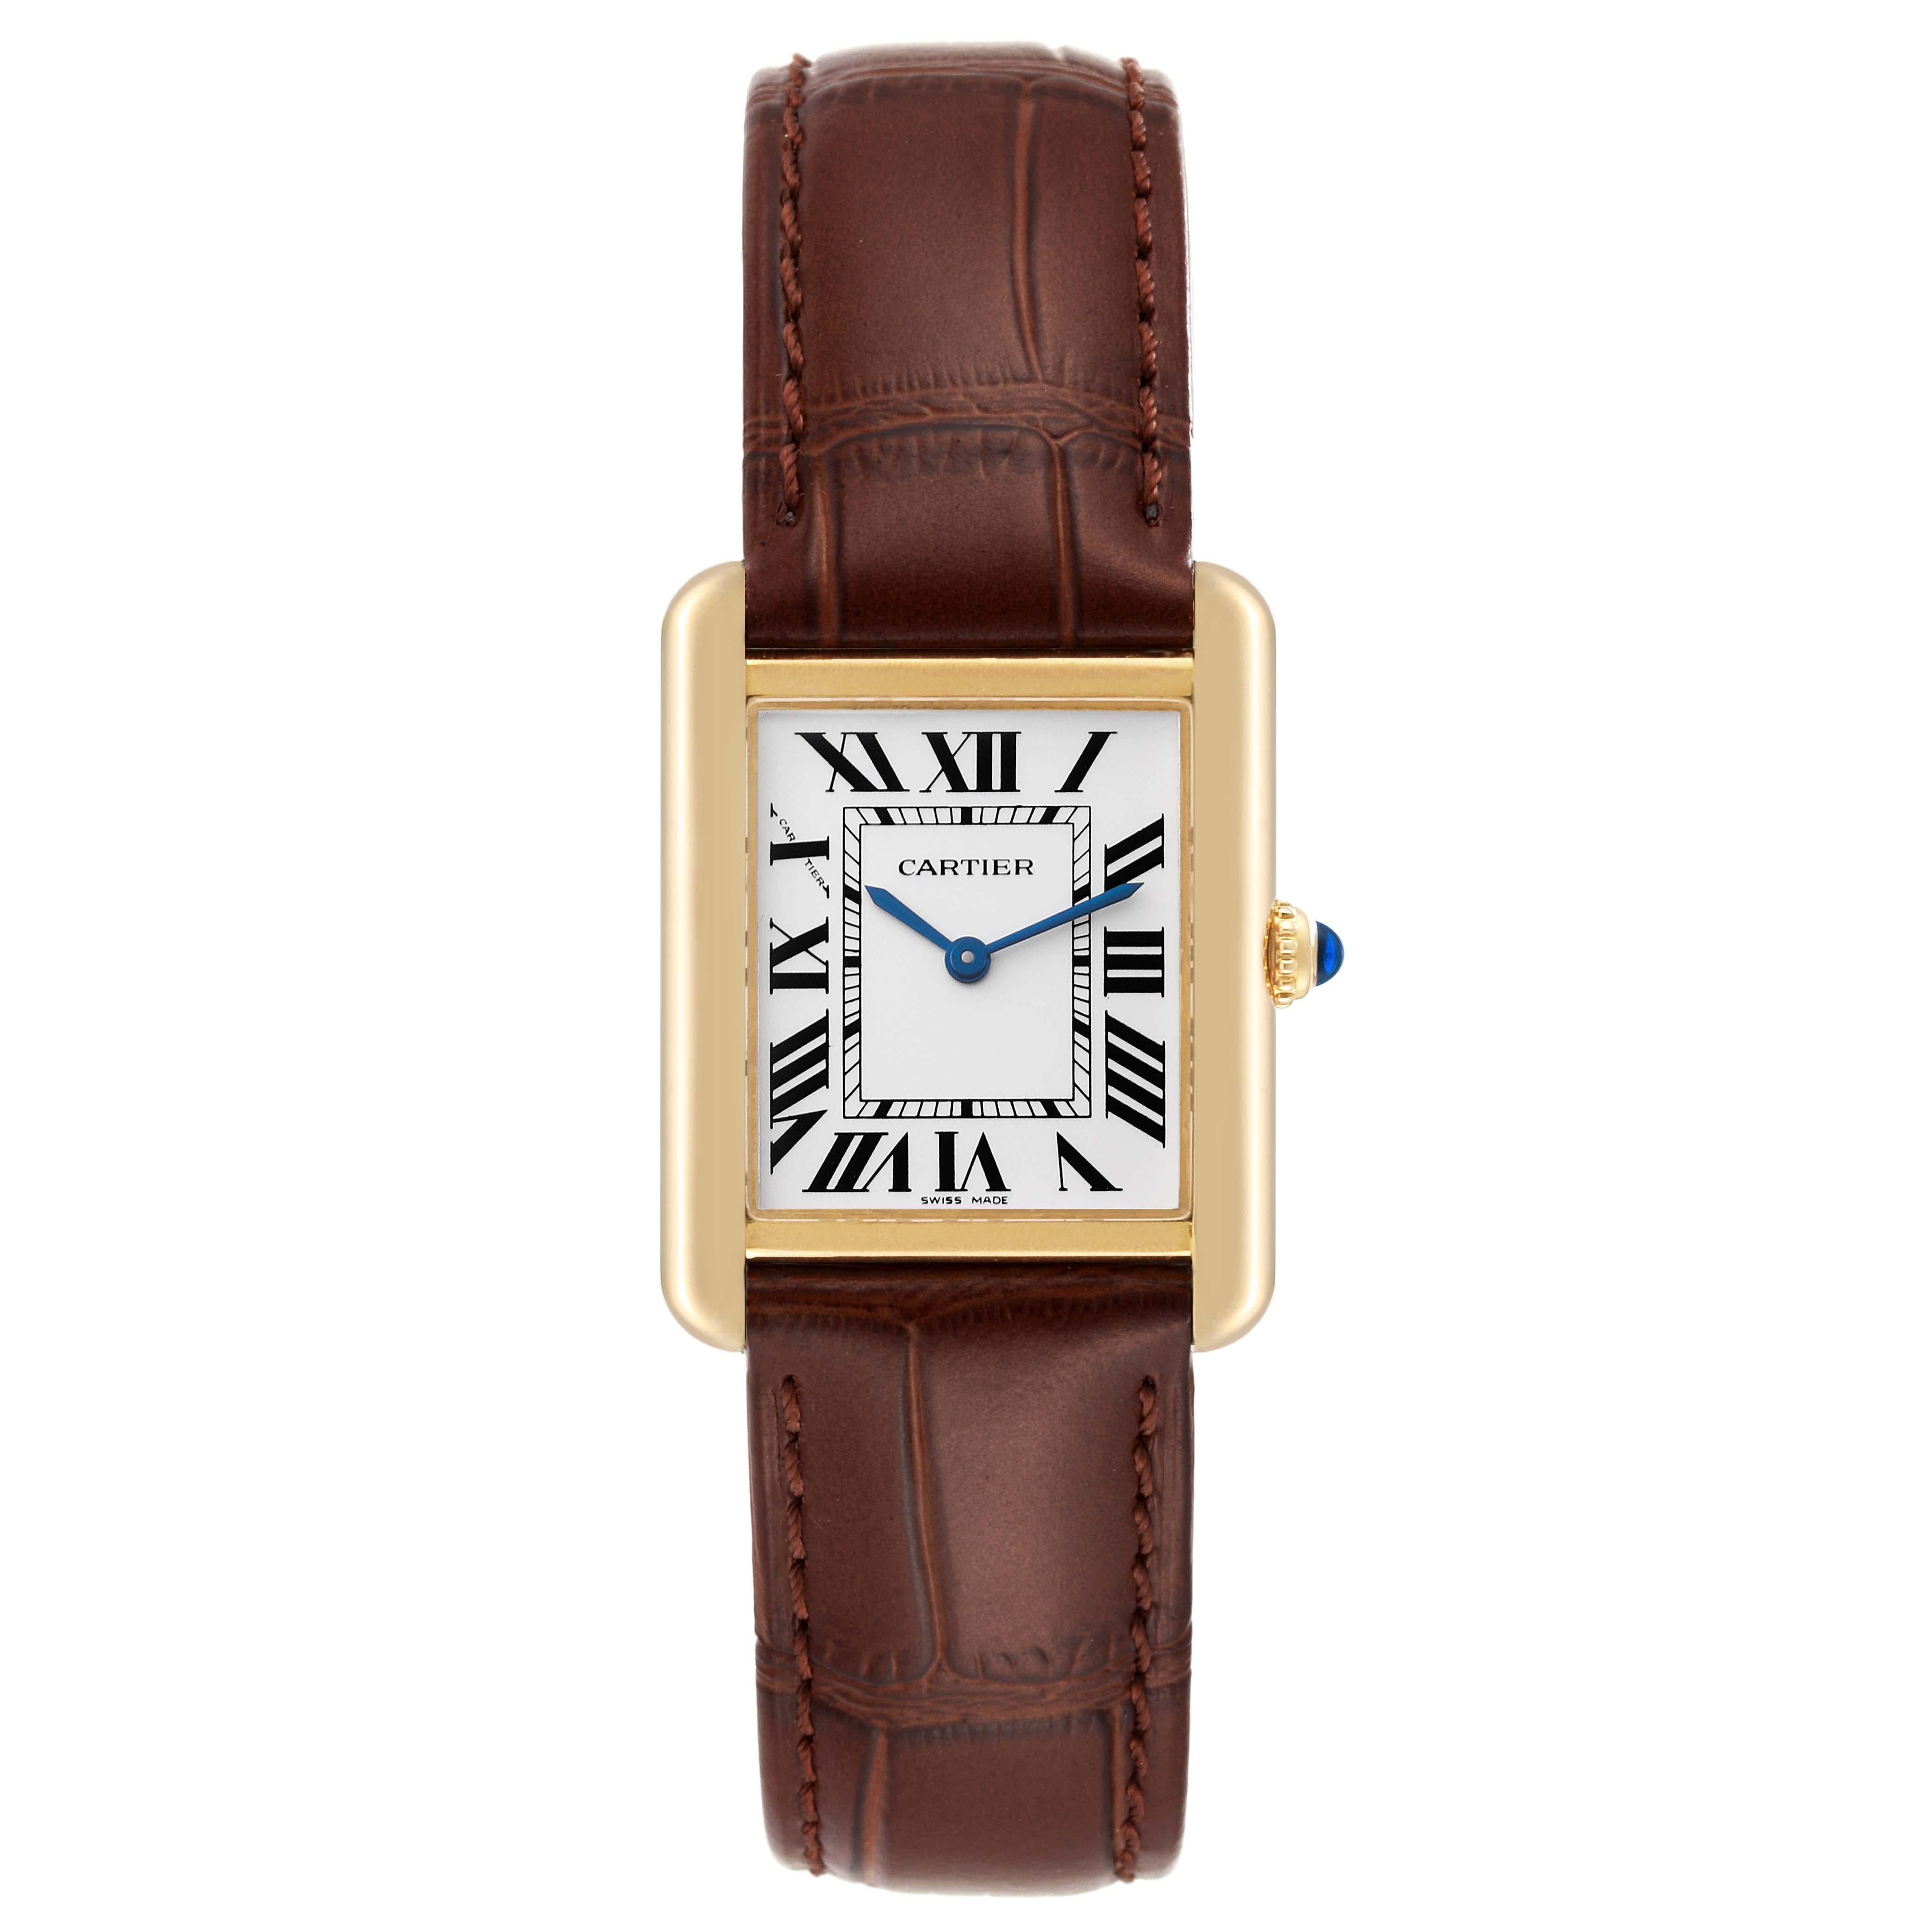 Cartier Tank Solo Yellow Gold Steel Silver Dial Ladies Watch W5200002 Card. Quartz movement. 18k yellow gold case 30.0 x 24.4 mm. Stainless steel caseback. Circular grained crown set with the blue spinel cabochon. . Scratch resistant sapphire